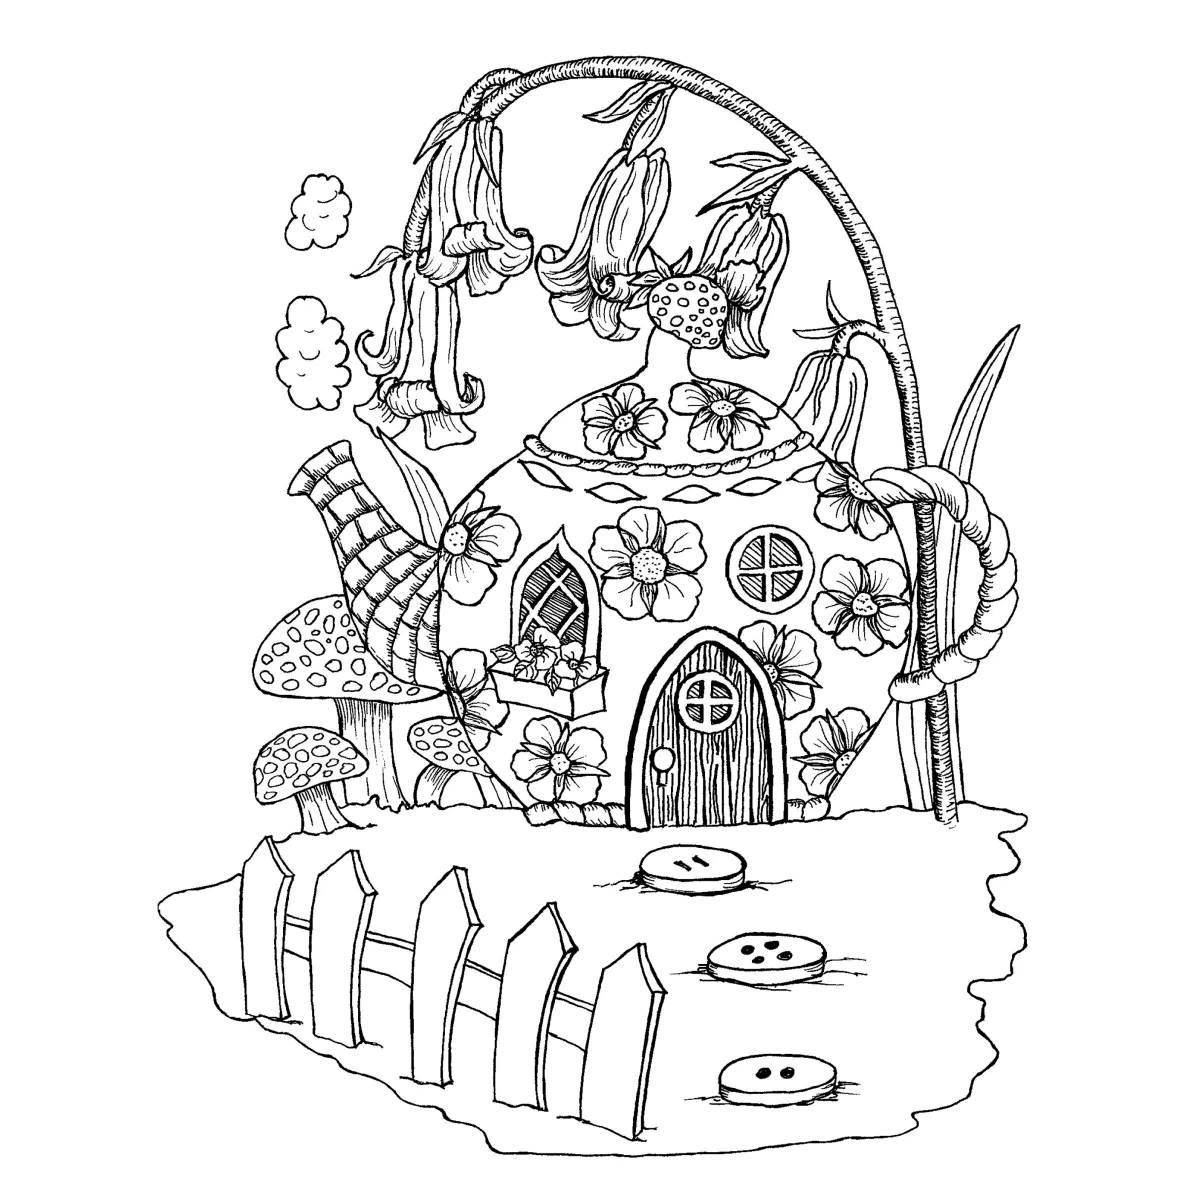 Magic house luxury coloring book